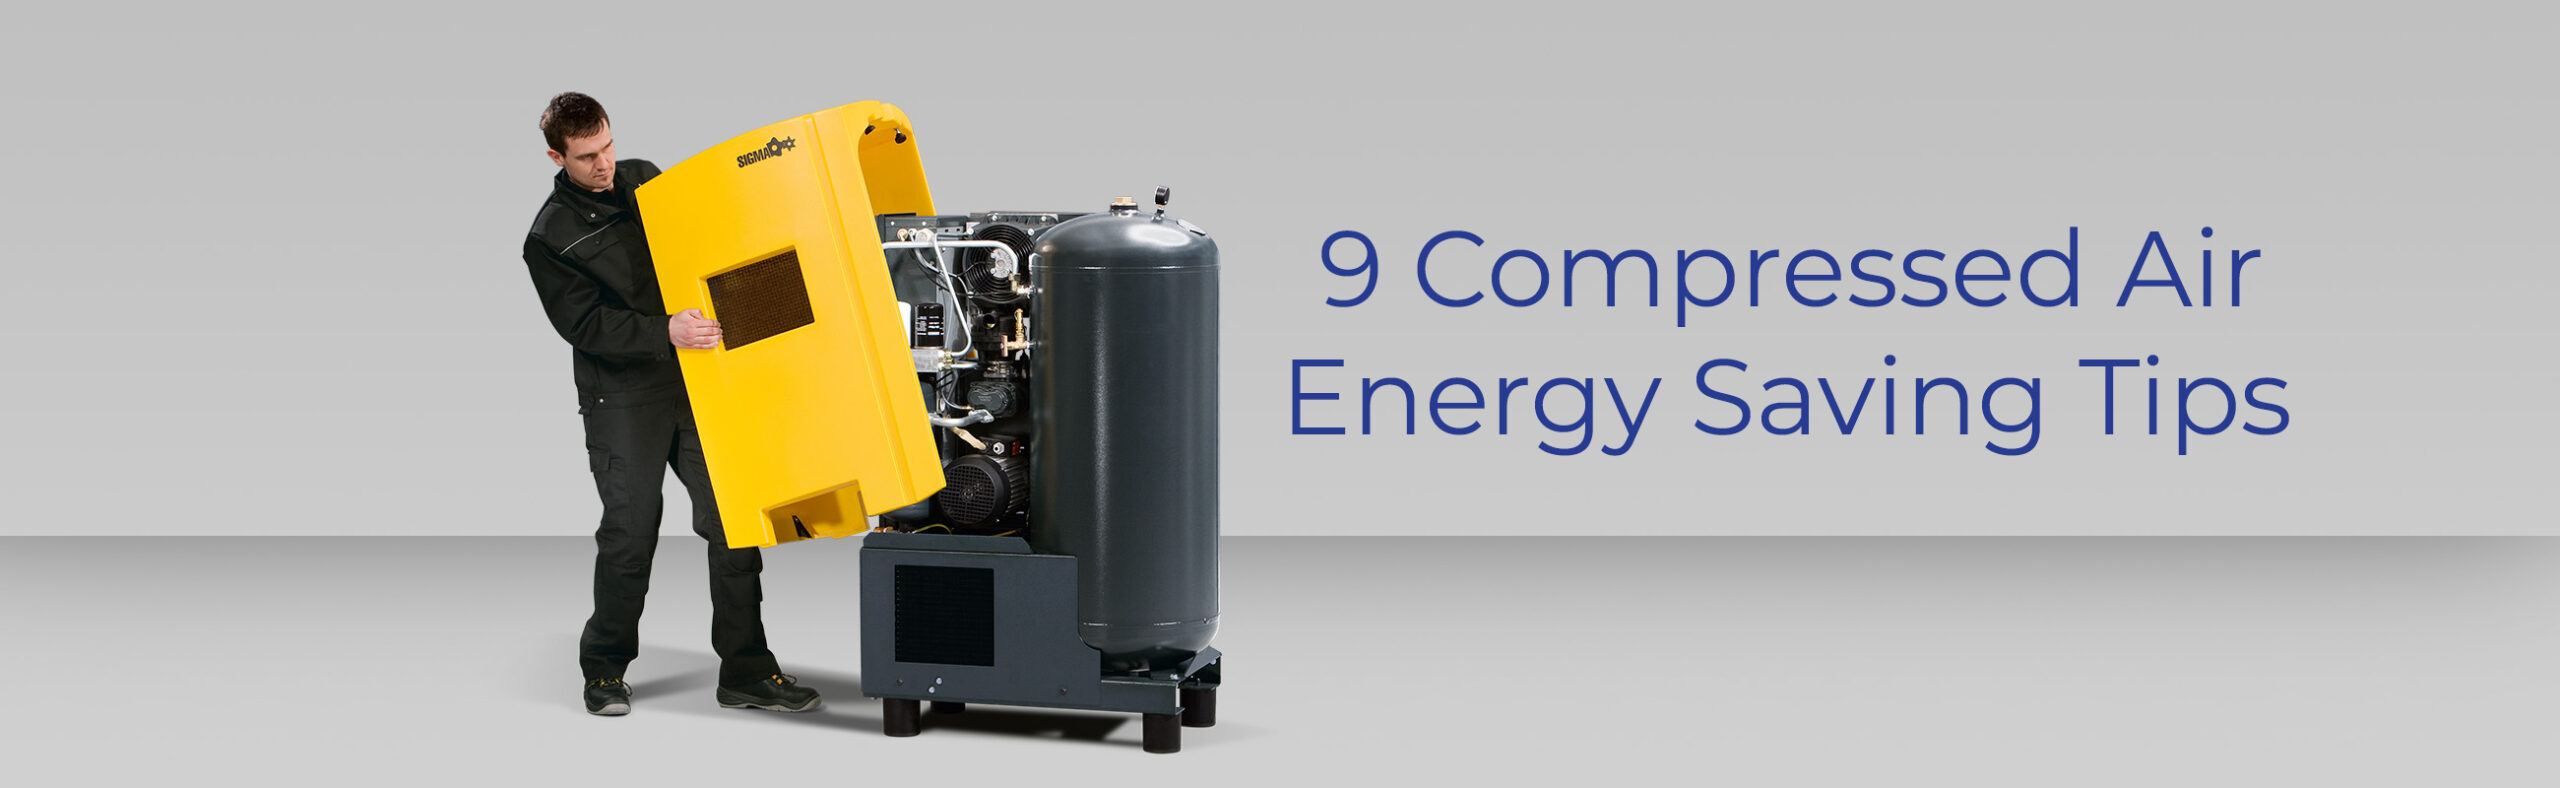 Compressed Air Energy Saving Tips - Commercial Air Compressor